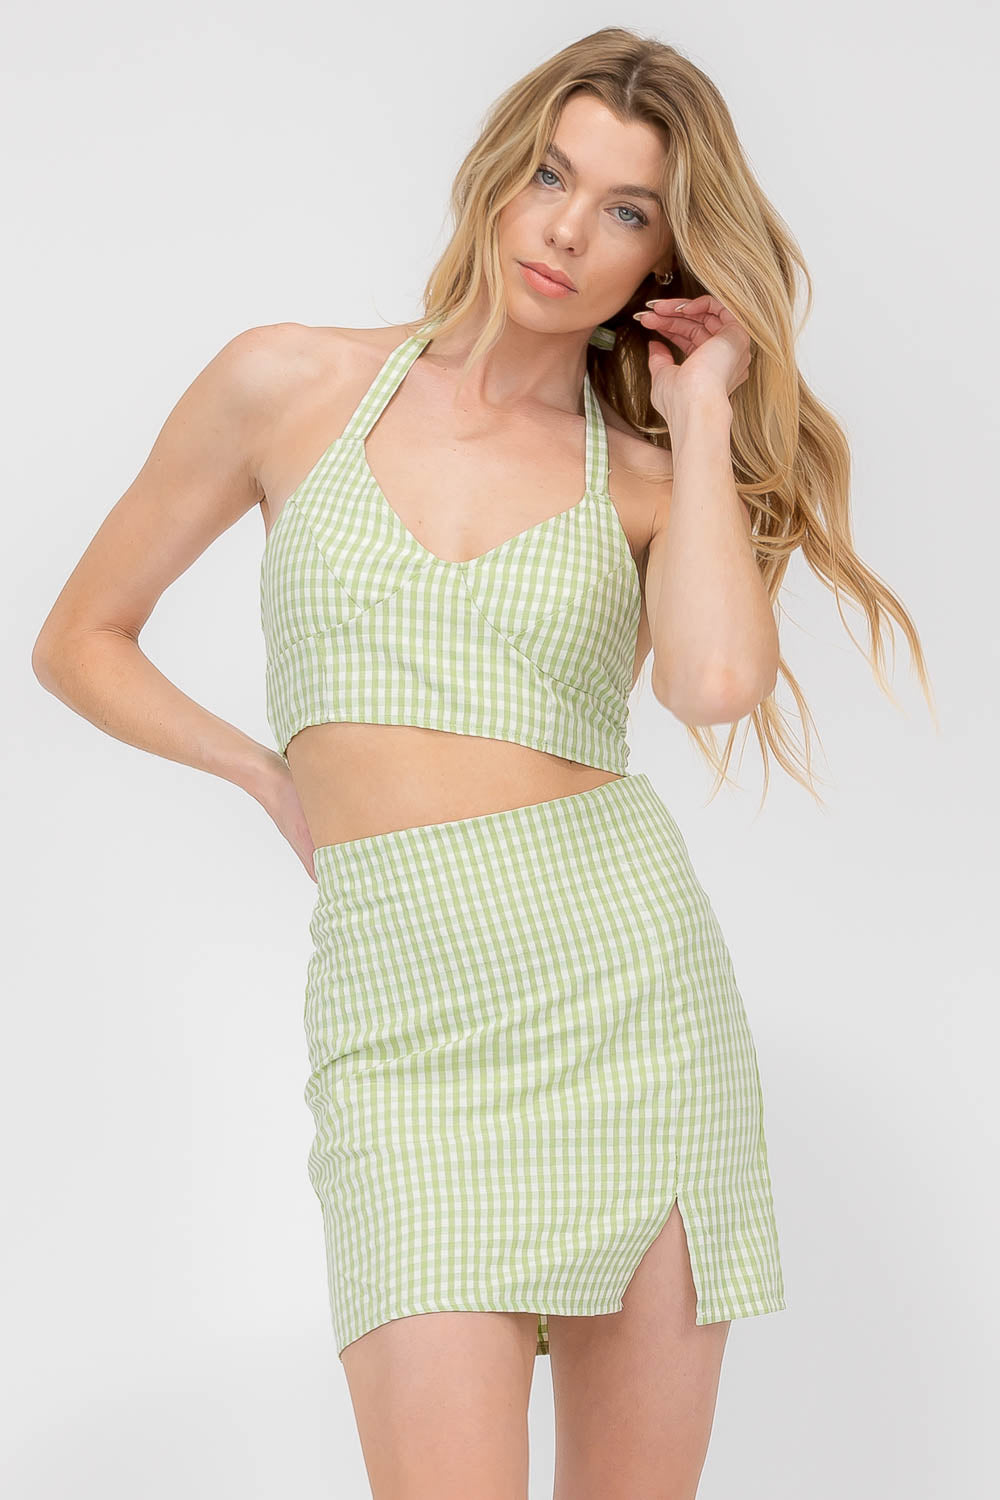 Laurie Green Gingham Halter Top and Skirt Set